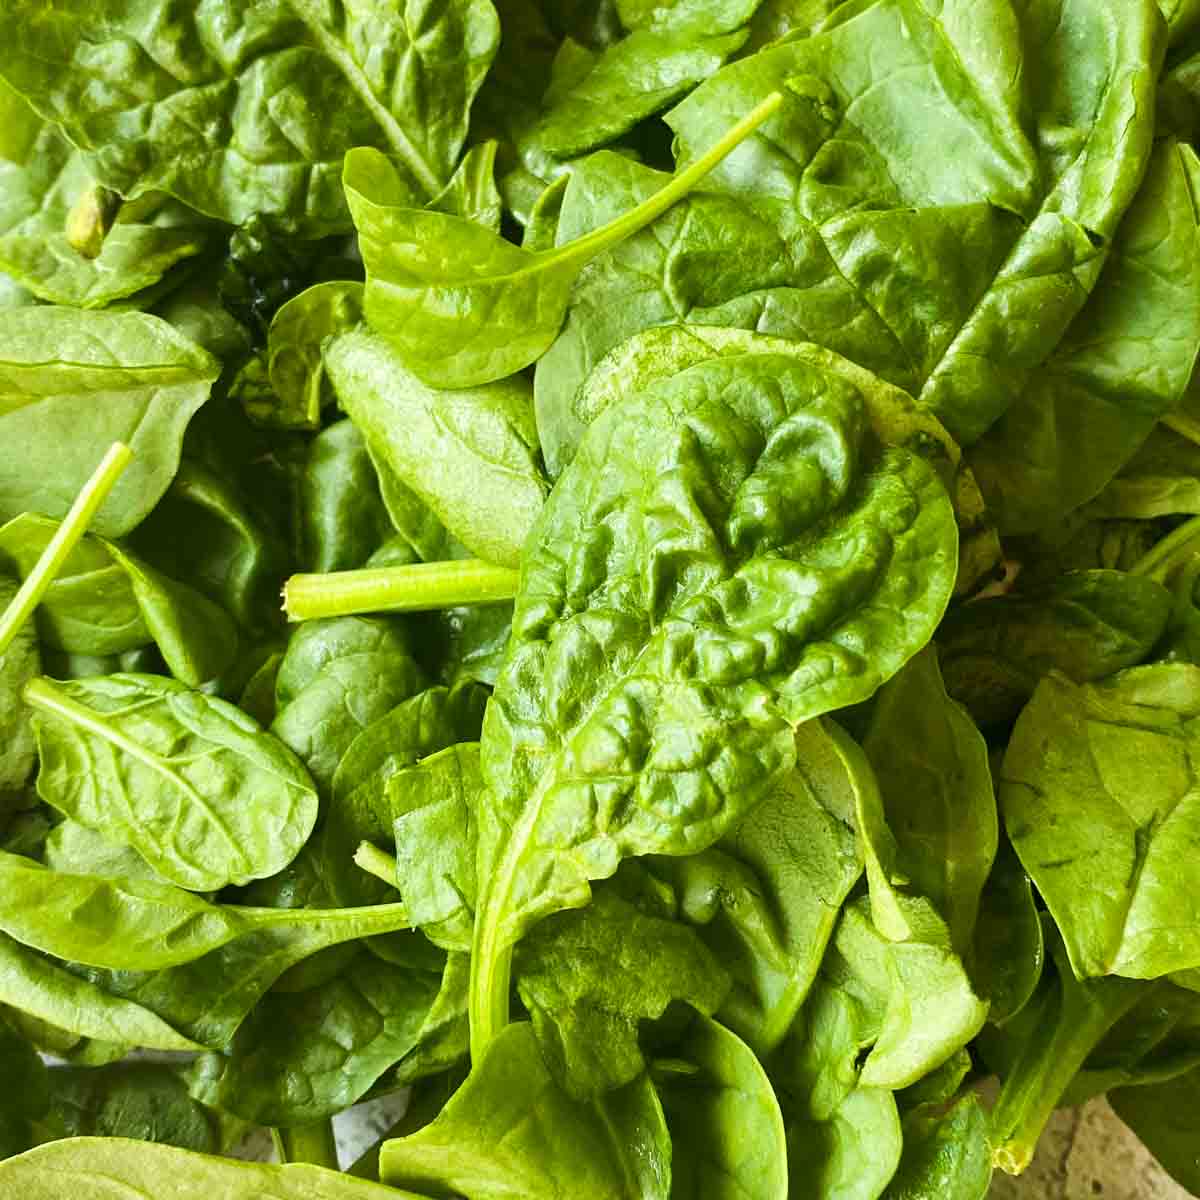 Bright green baby spinach